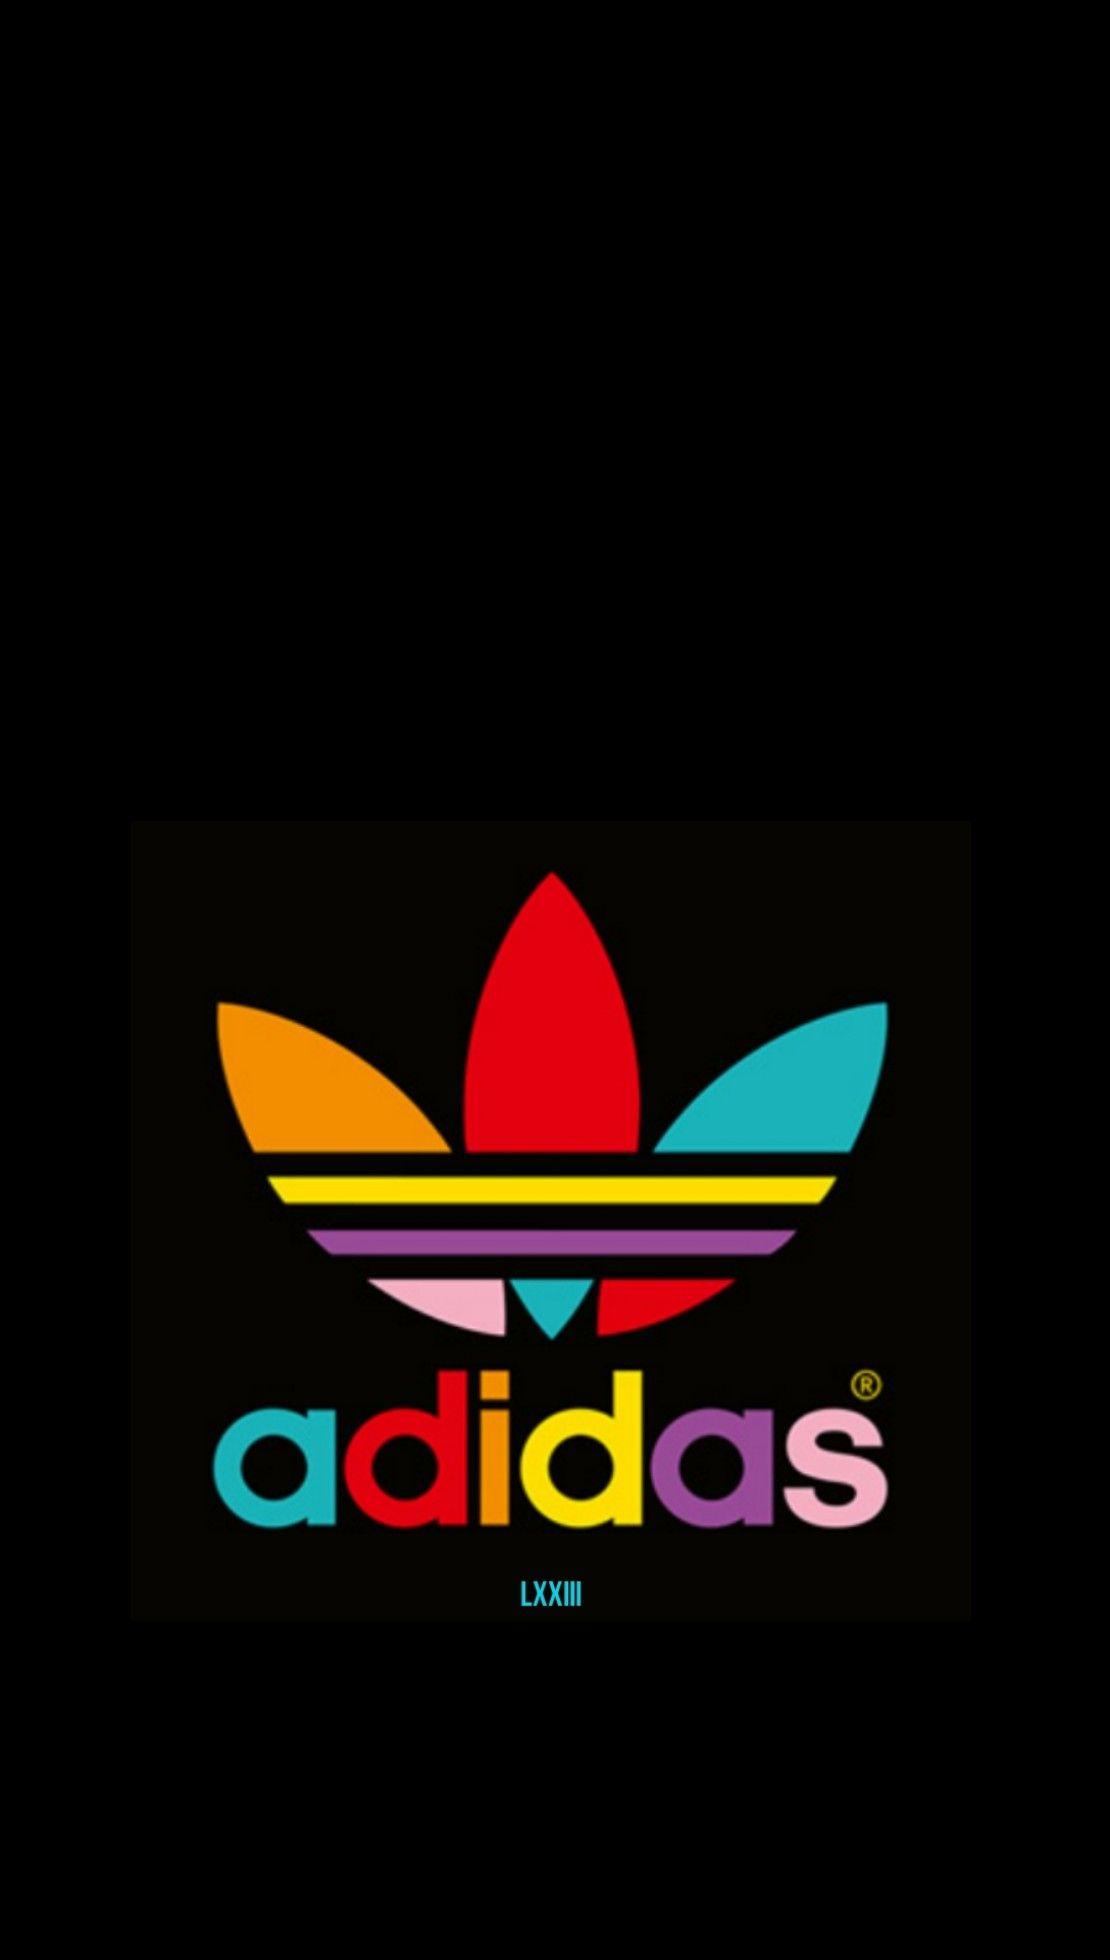 Coreful the Adidas Logo - Colorful Adidas on Black Wallpaper | *Black Wallpapers | Iphone ...